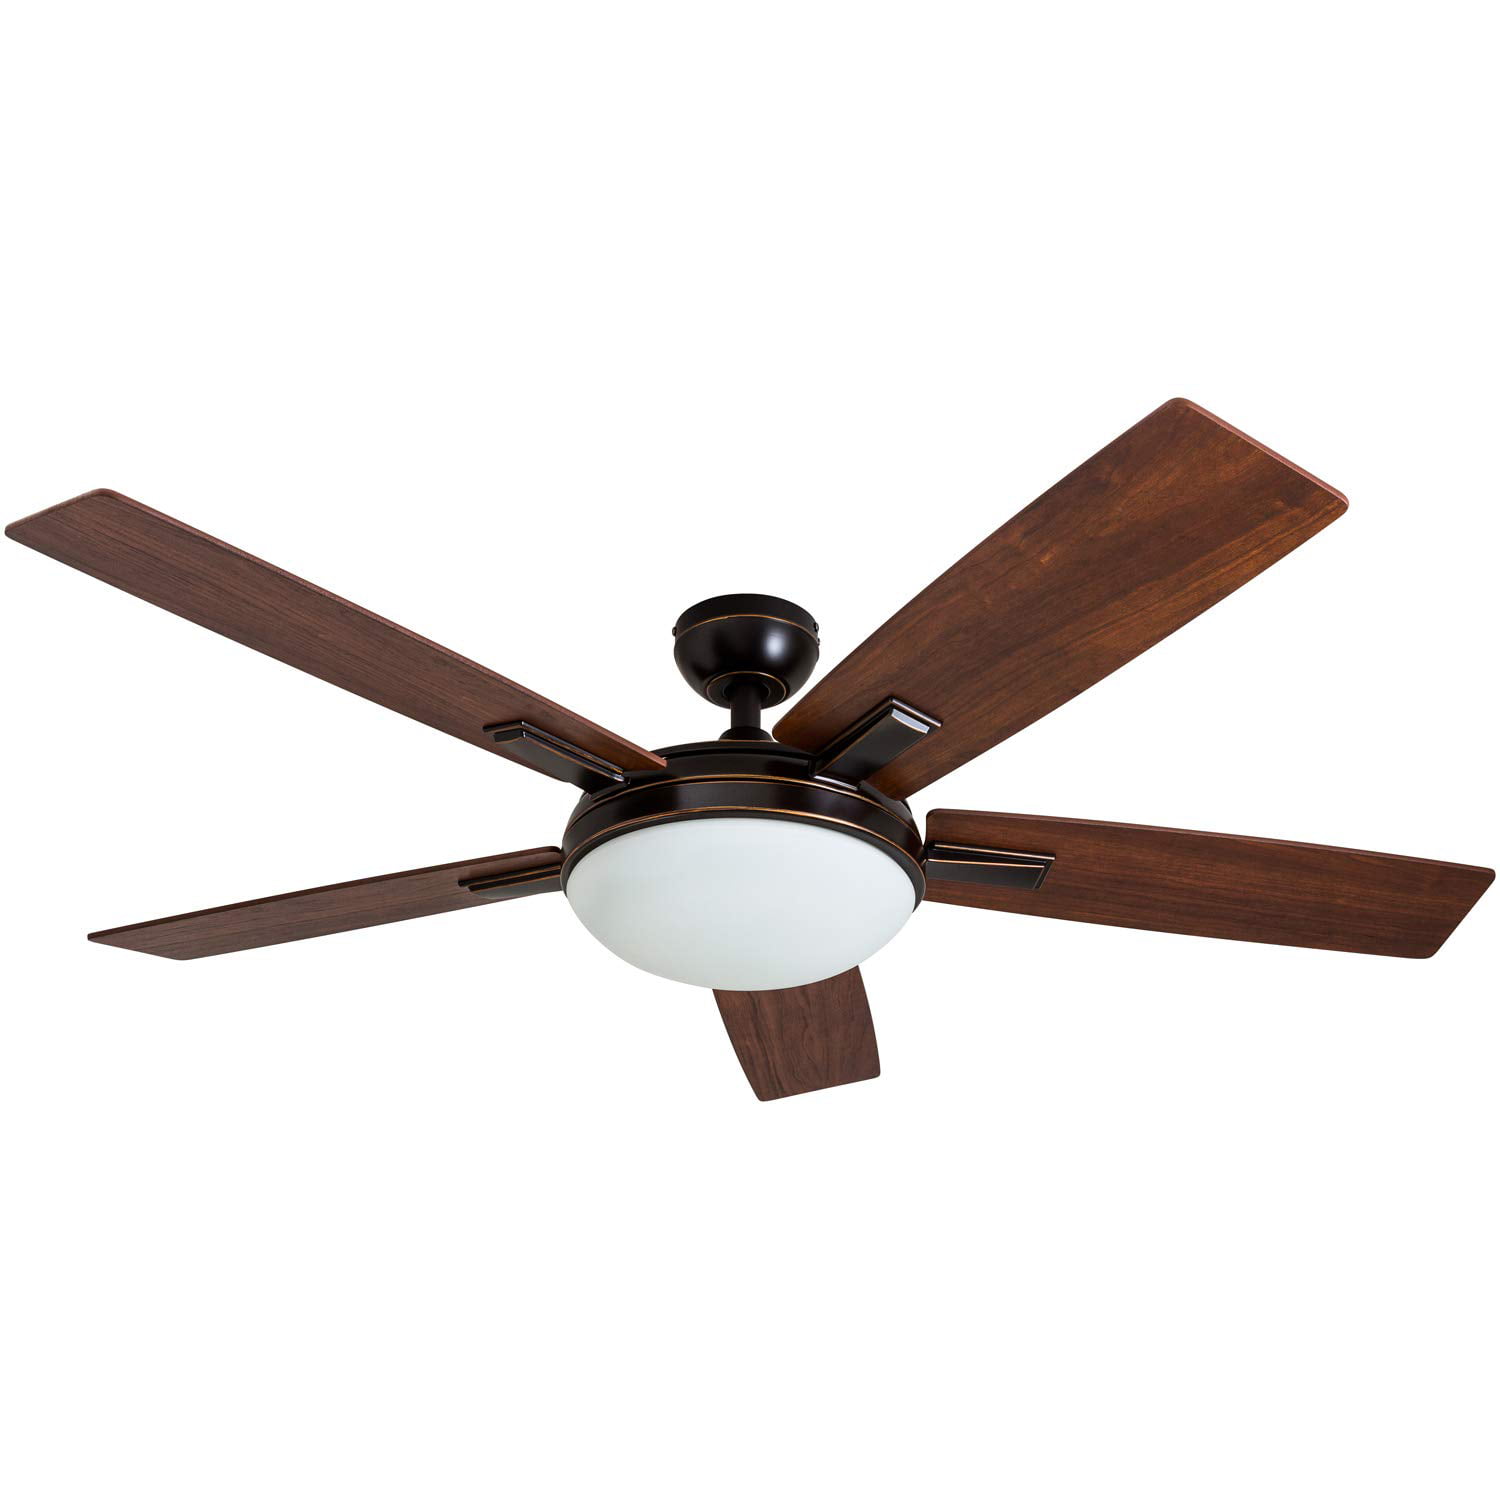 Prominence Home Emporia 52-Inch Indoor Oil Rubbed Bronze ...